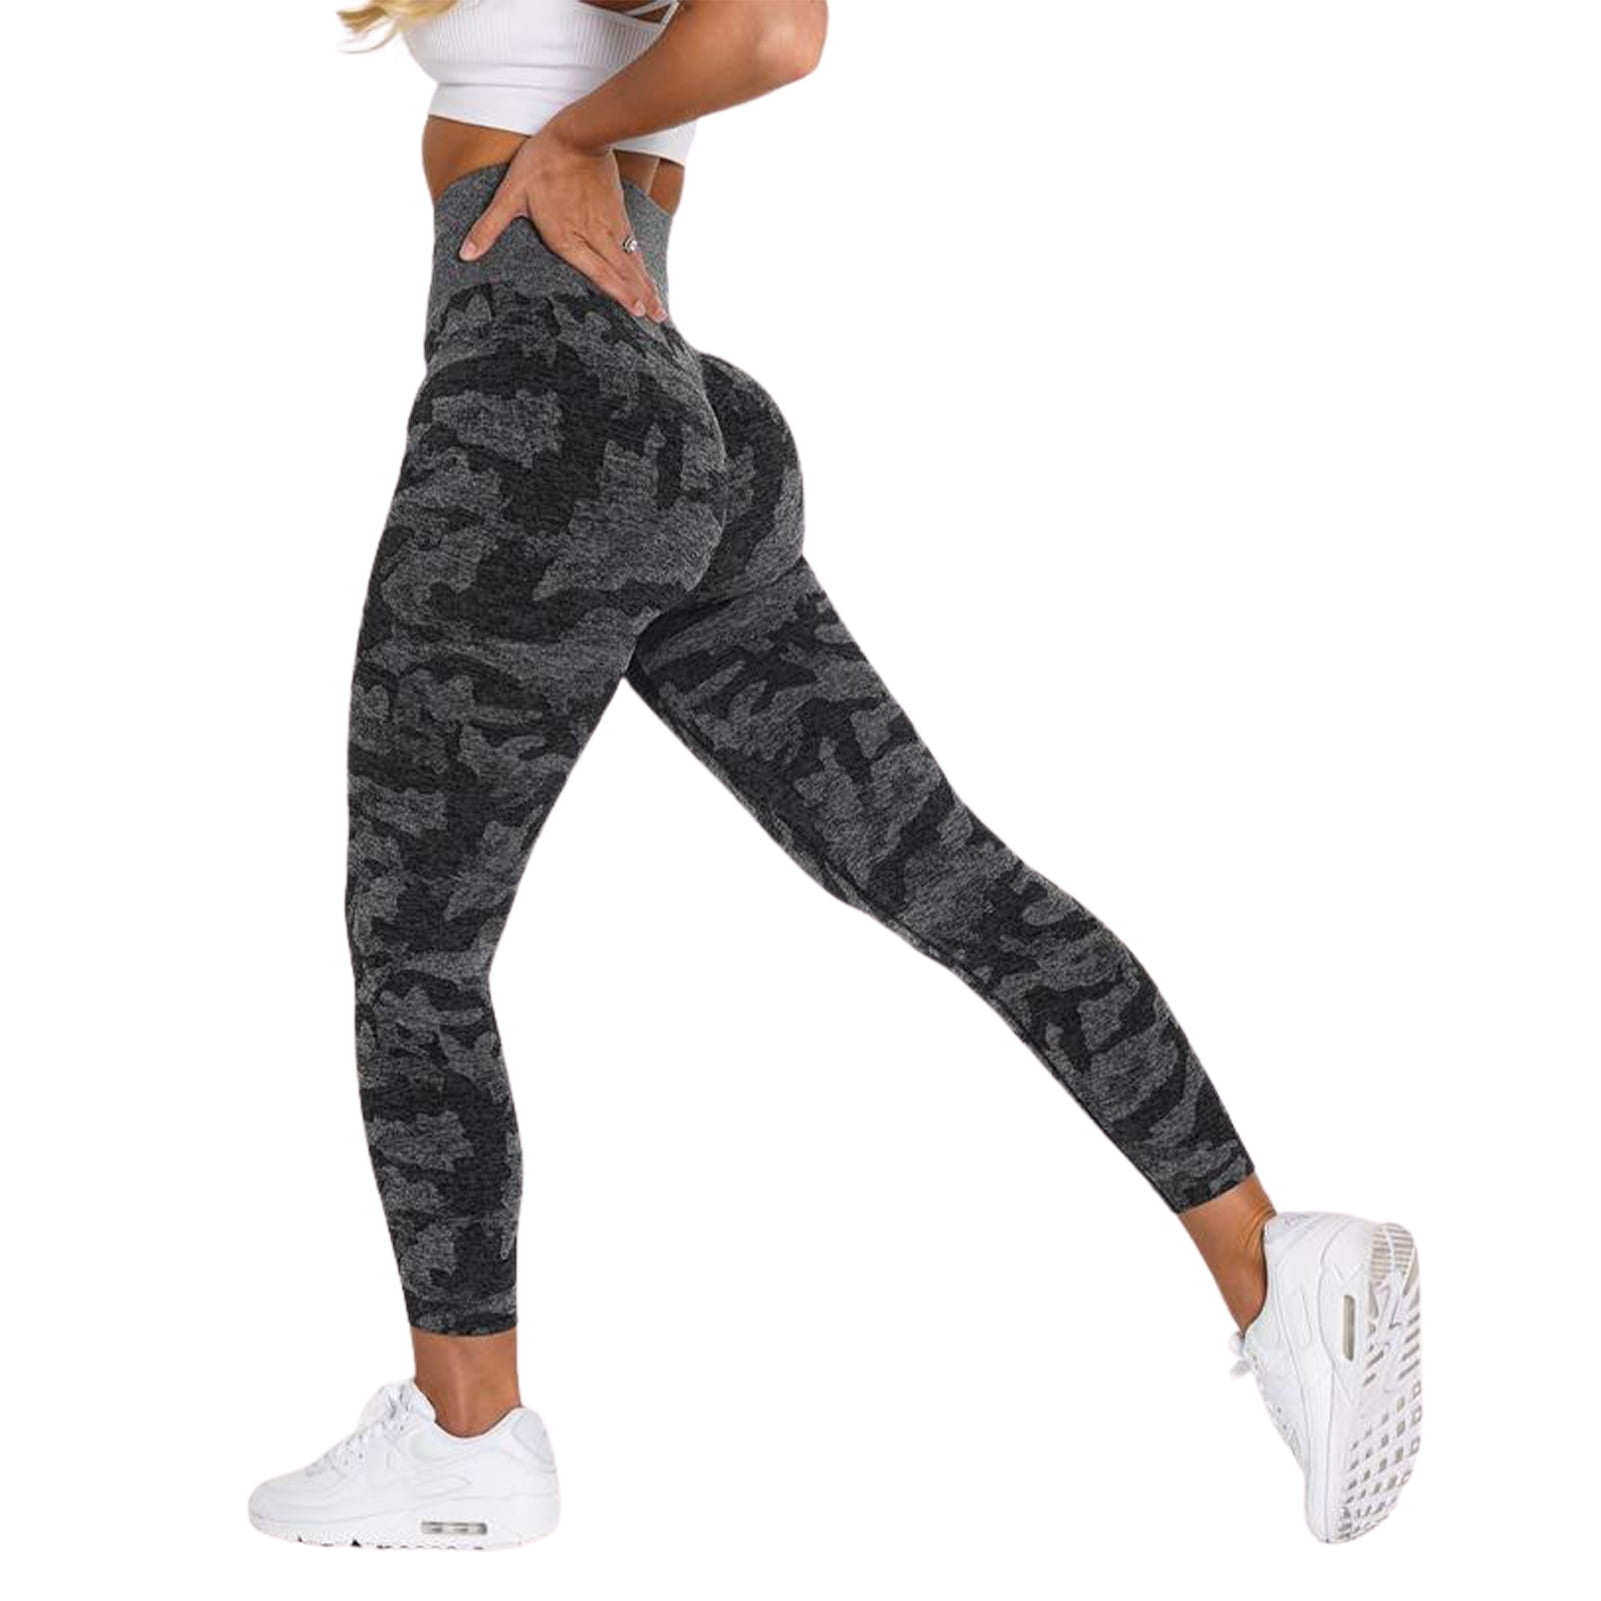 Details about   Womens Tie Dye Sports Fitness Shorts Skinny Yoga Pants Lounge Outdoor Leggings 